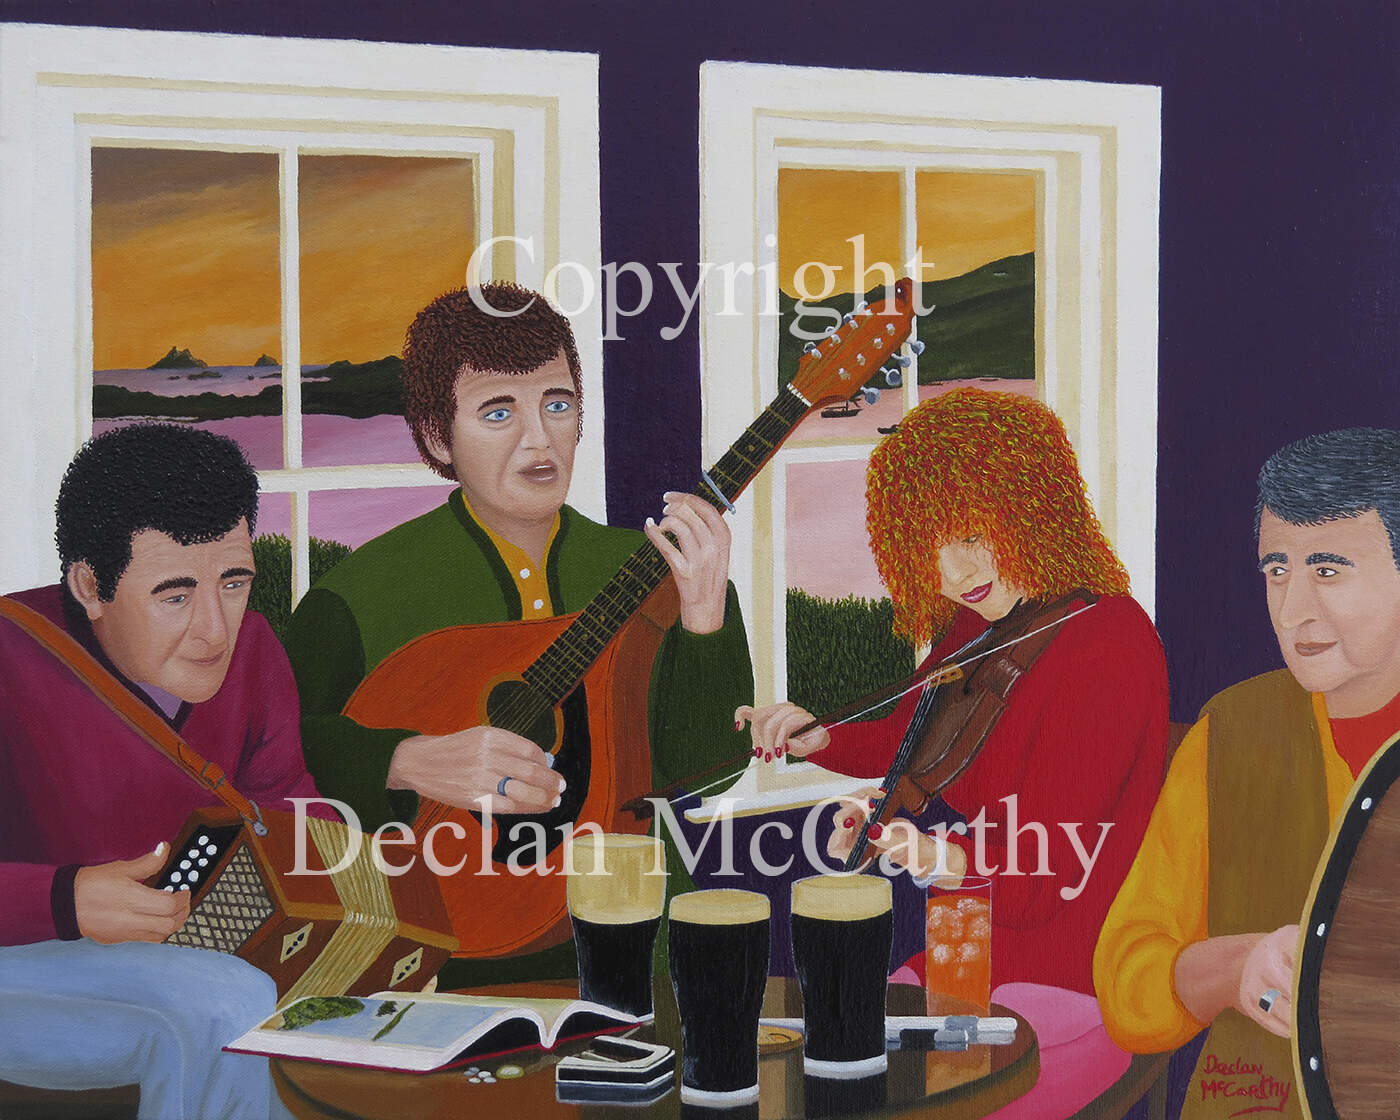 A Music session with a sunset over the Skelligs and Derrynane Harbour, Kerry, through the windows.